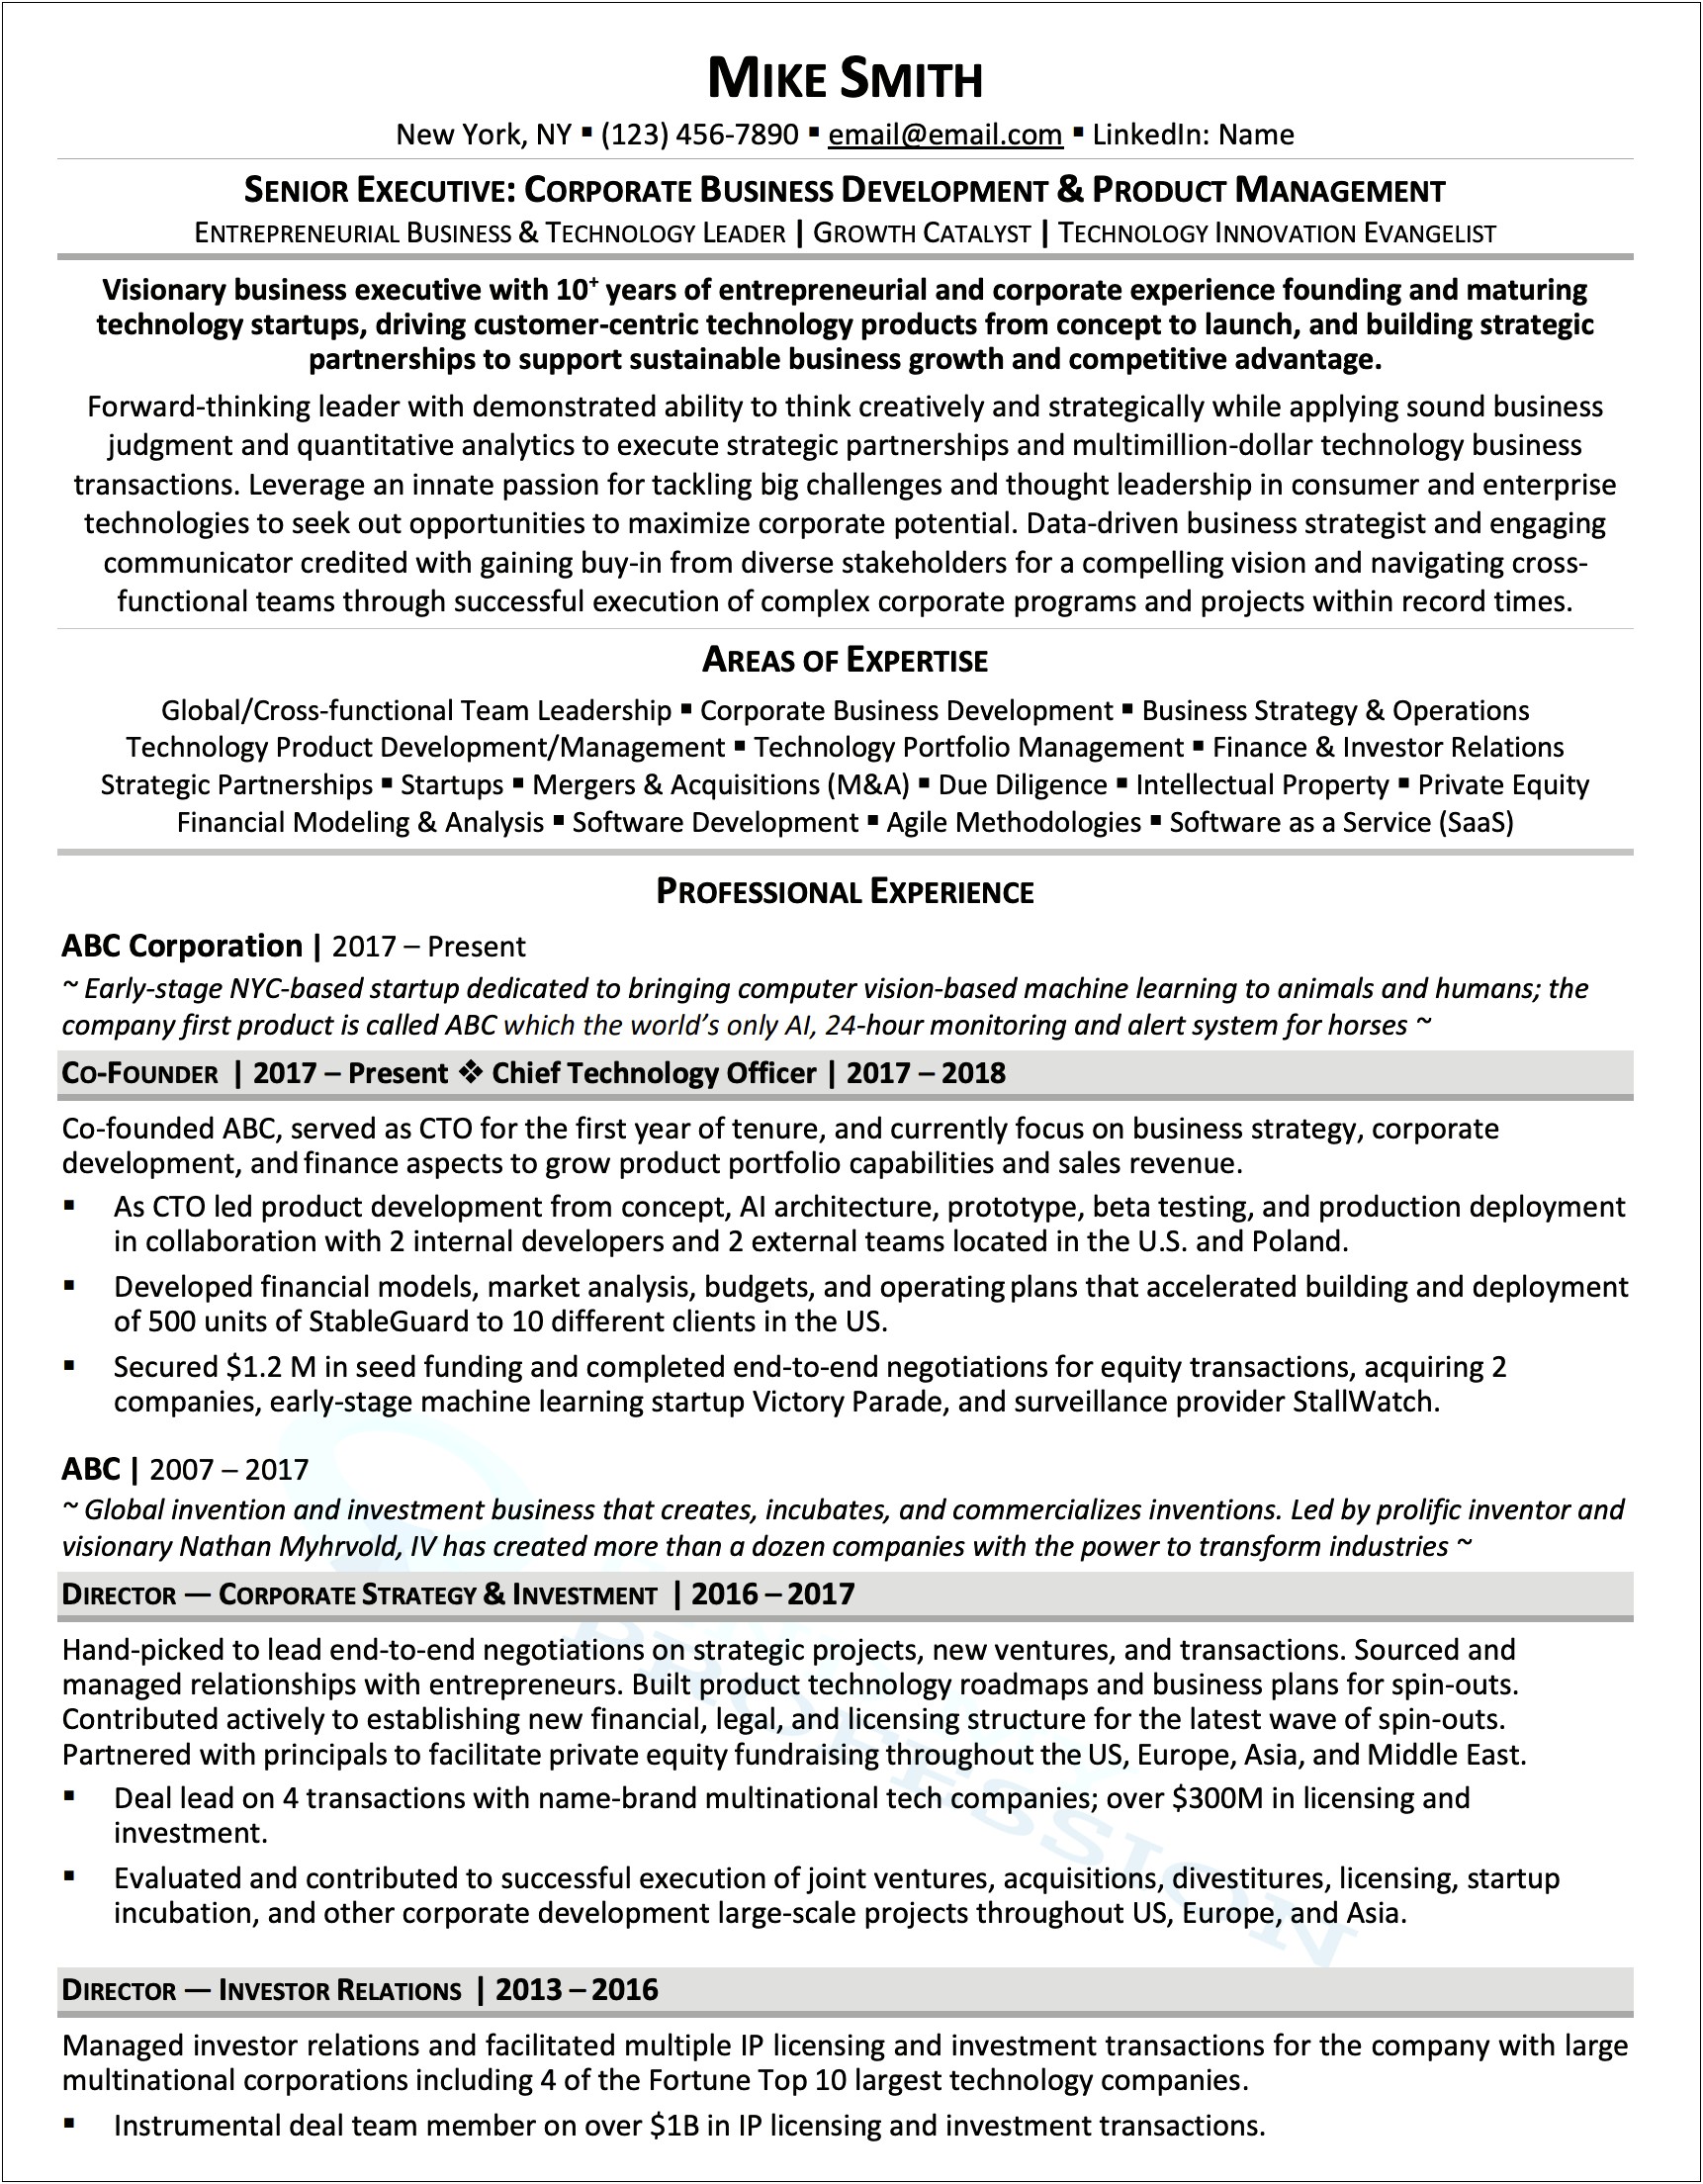 Resume Wording For Small Business Owner